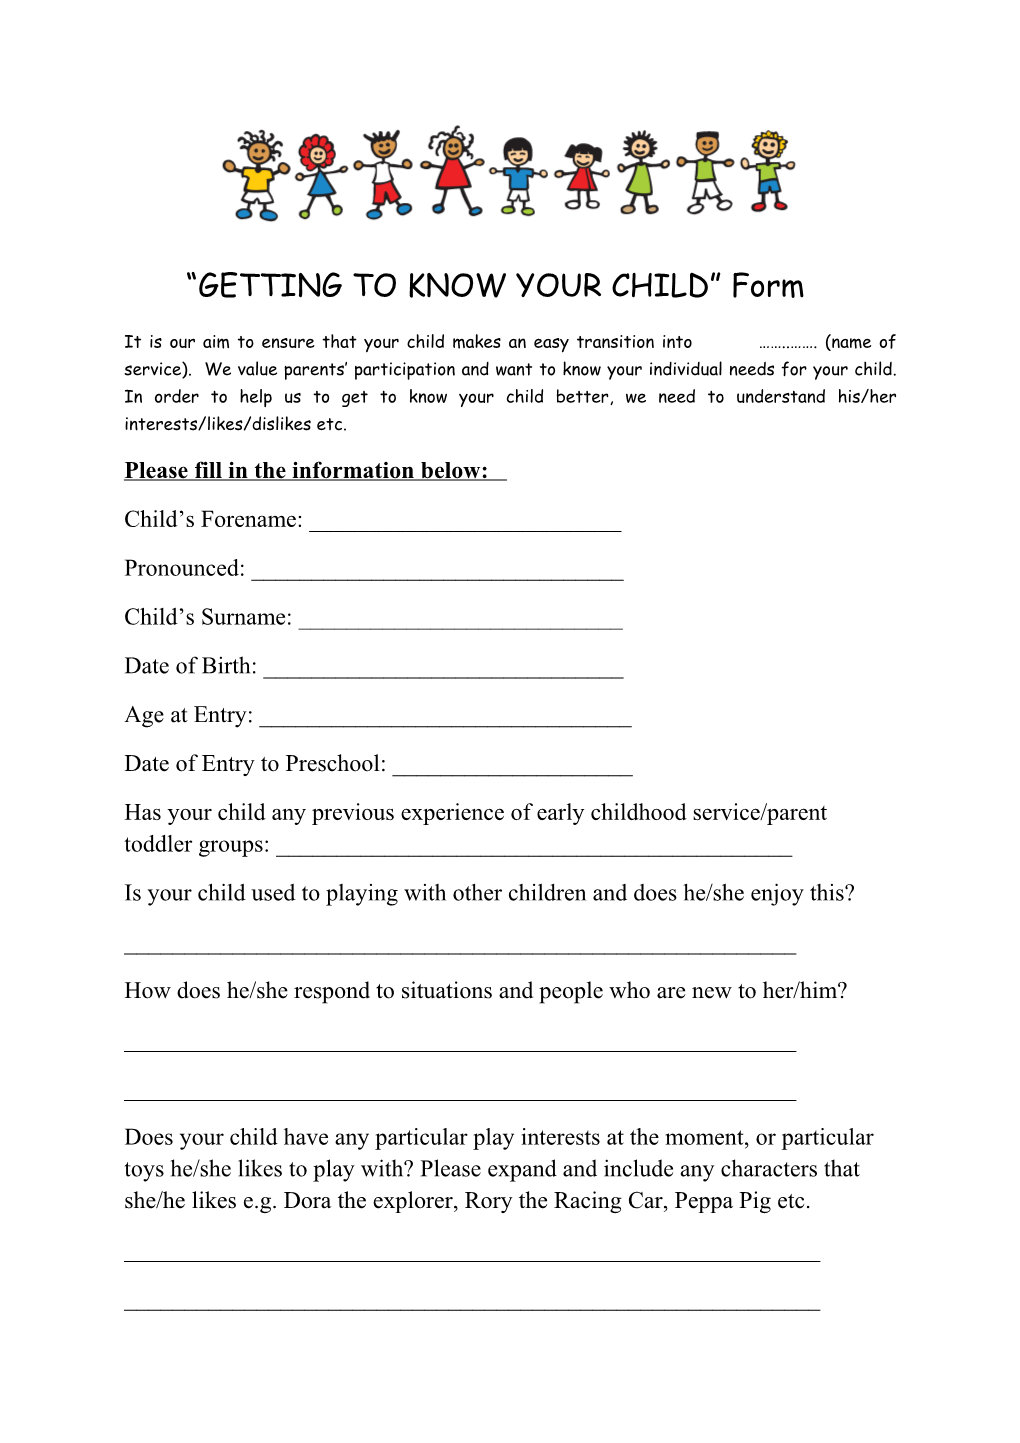 GETTING to KNOW YOUR CHILD Form